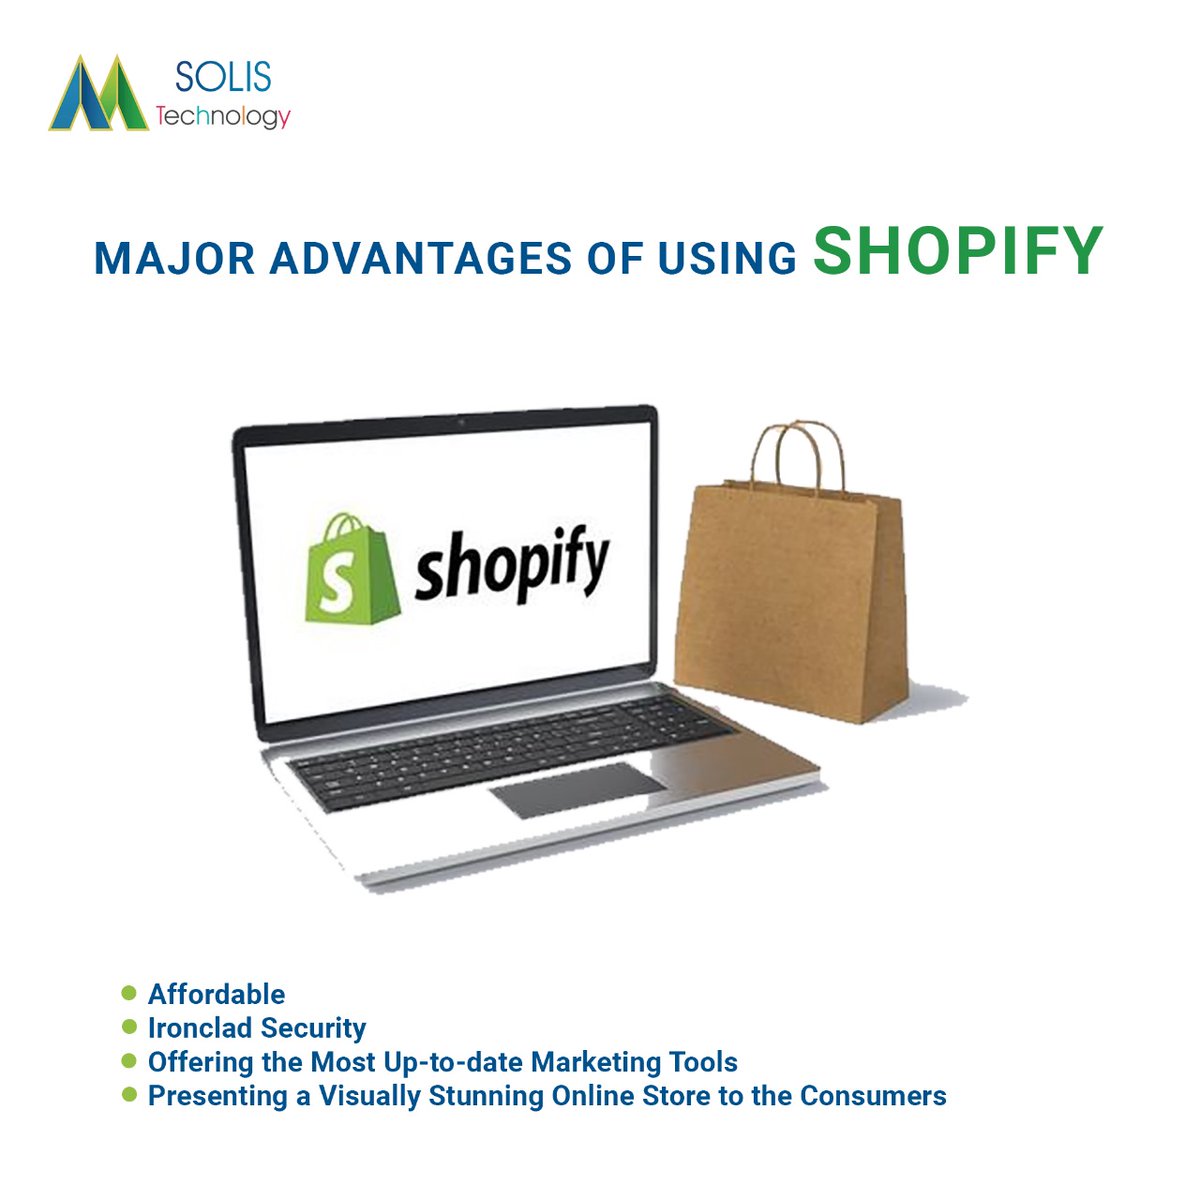 #SolisTechnology aids you in developing a solid e-commerce platform that is both visually stunning & captivating.

#shopifydropshipping #dropshippingproducts #marketing #digitalmarketing #ecommercebusiness #onlineshopping #website #onlinestore #onlineshop #ecommercewebsite